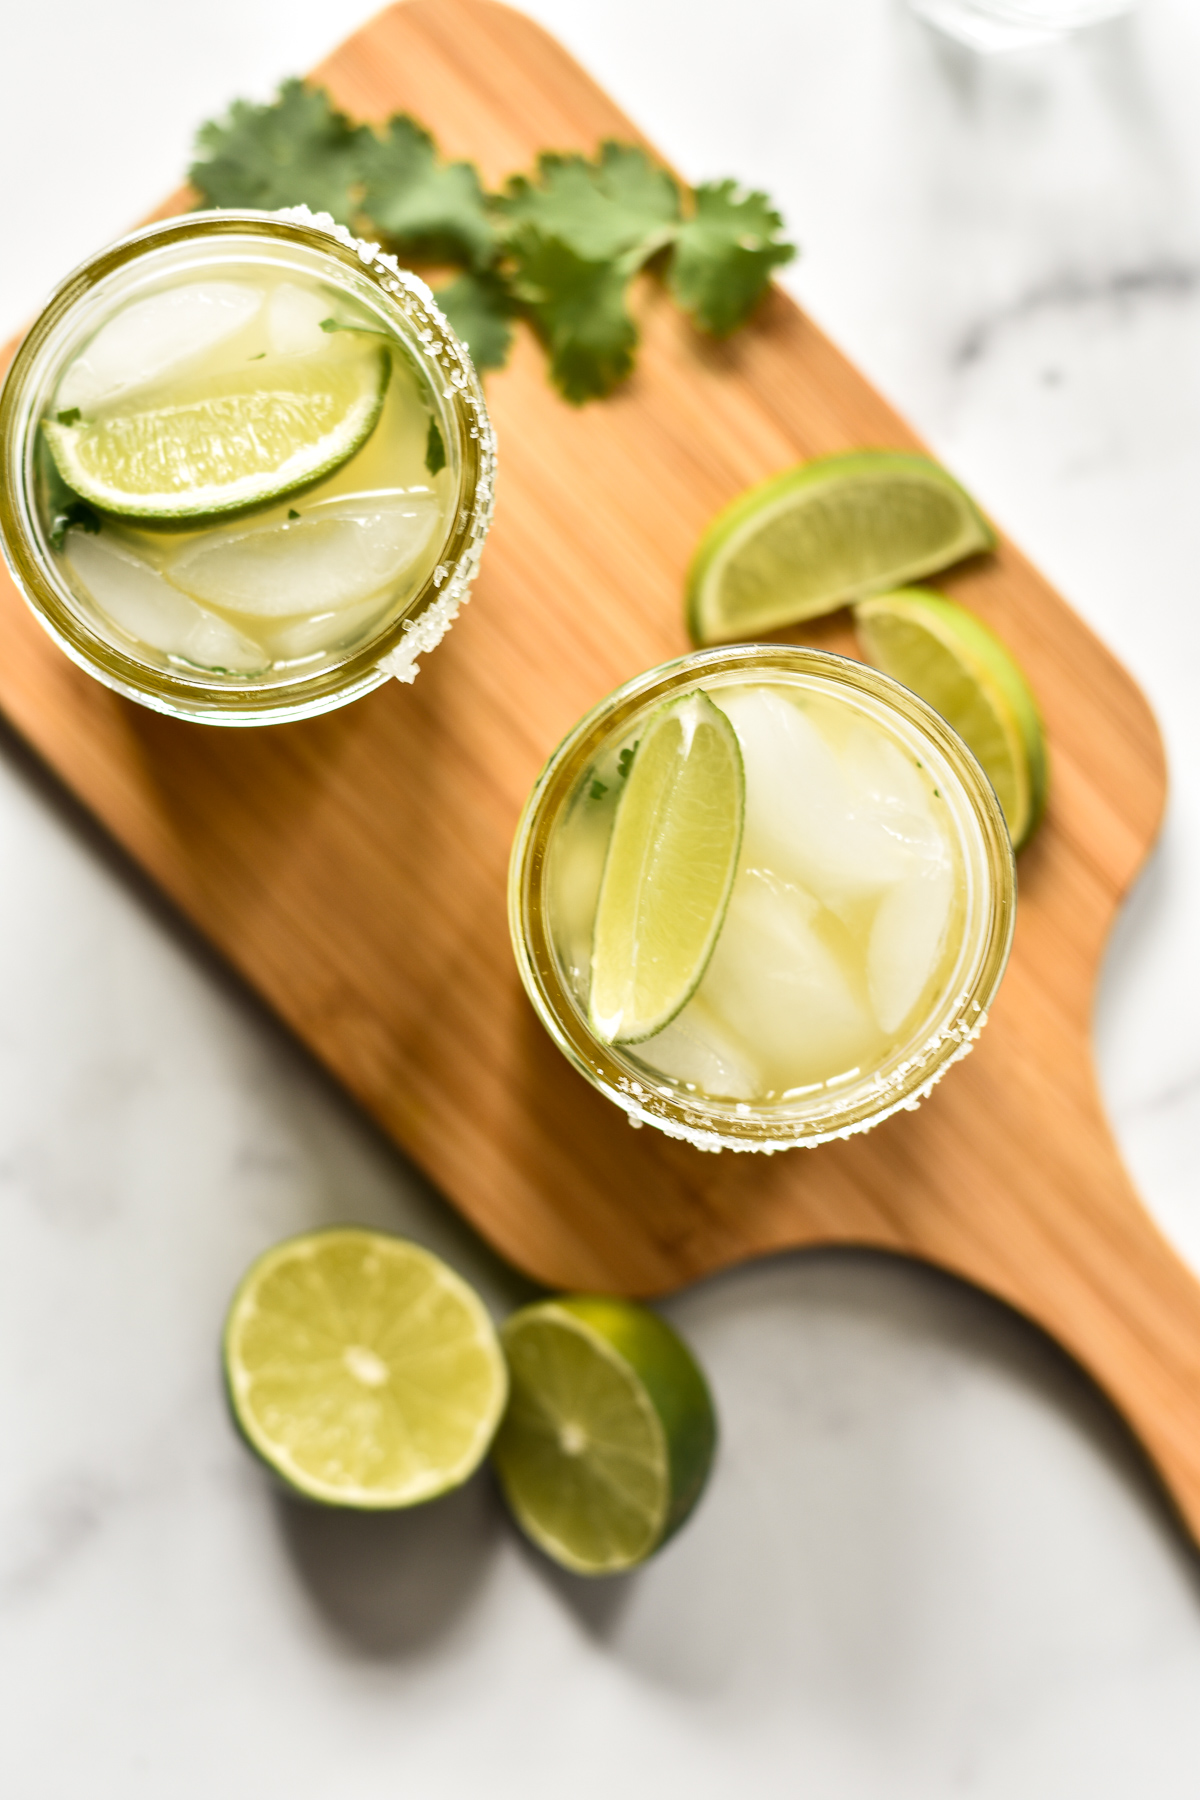 two pineapple cilantro margaritas on a wooden cutting board with limes and cilantro